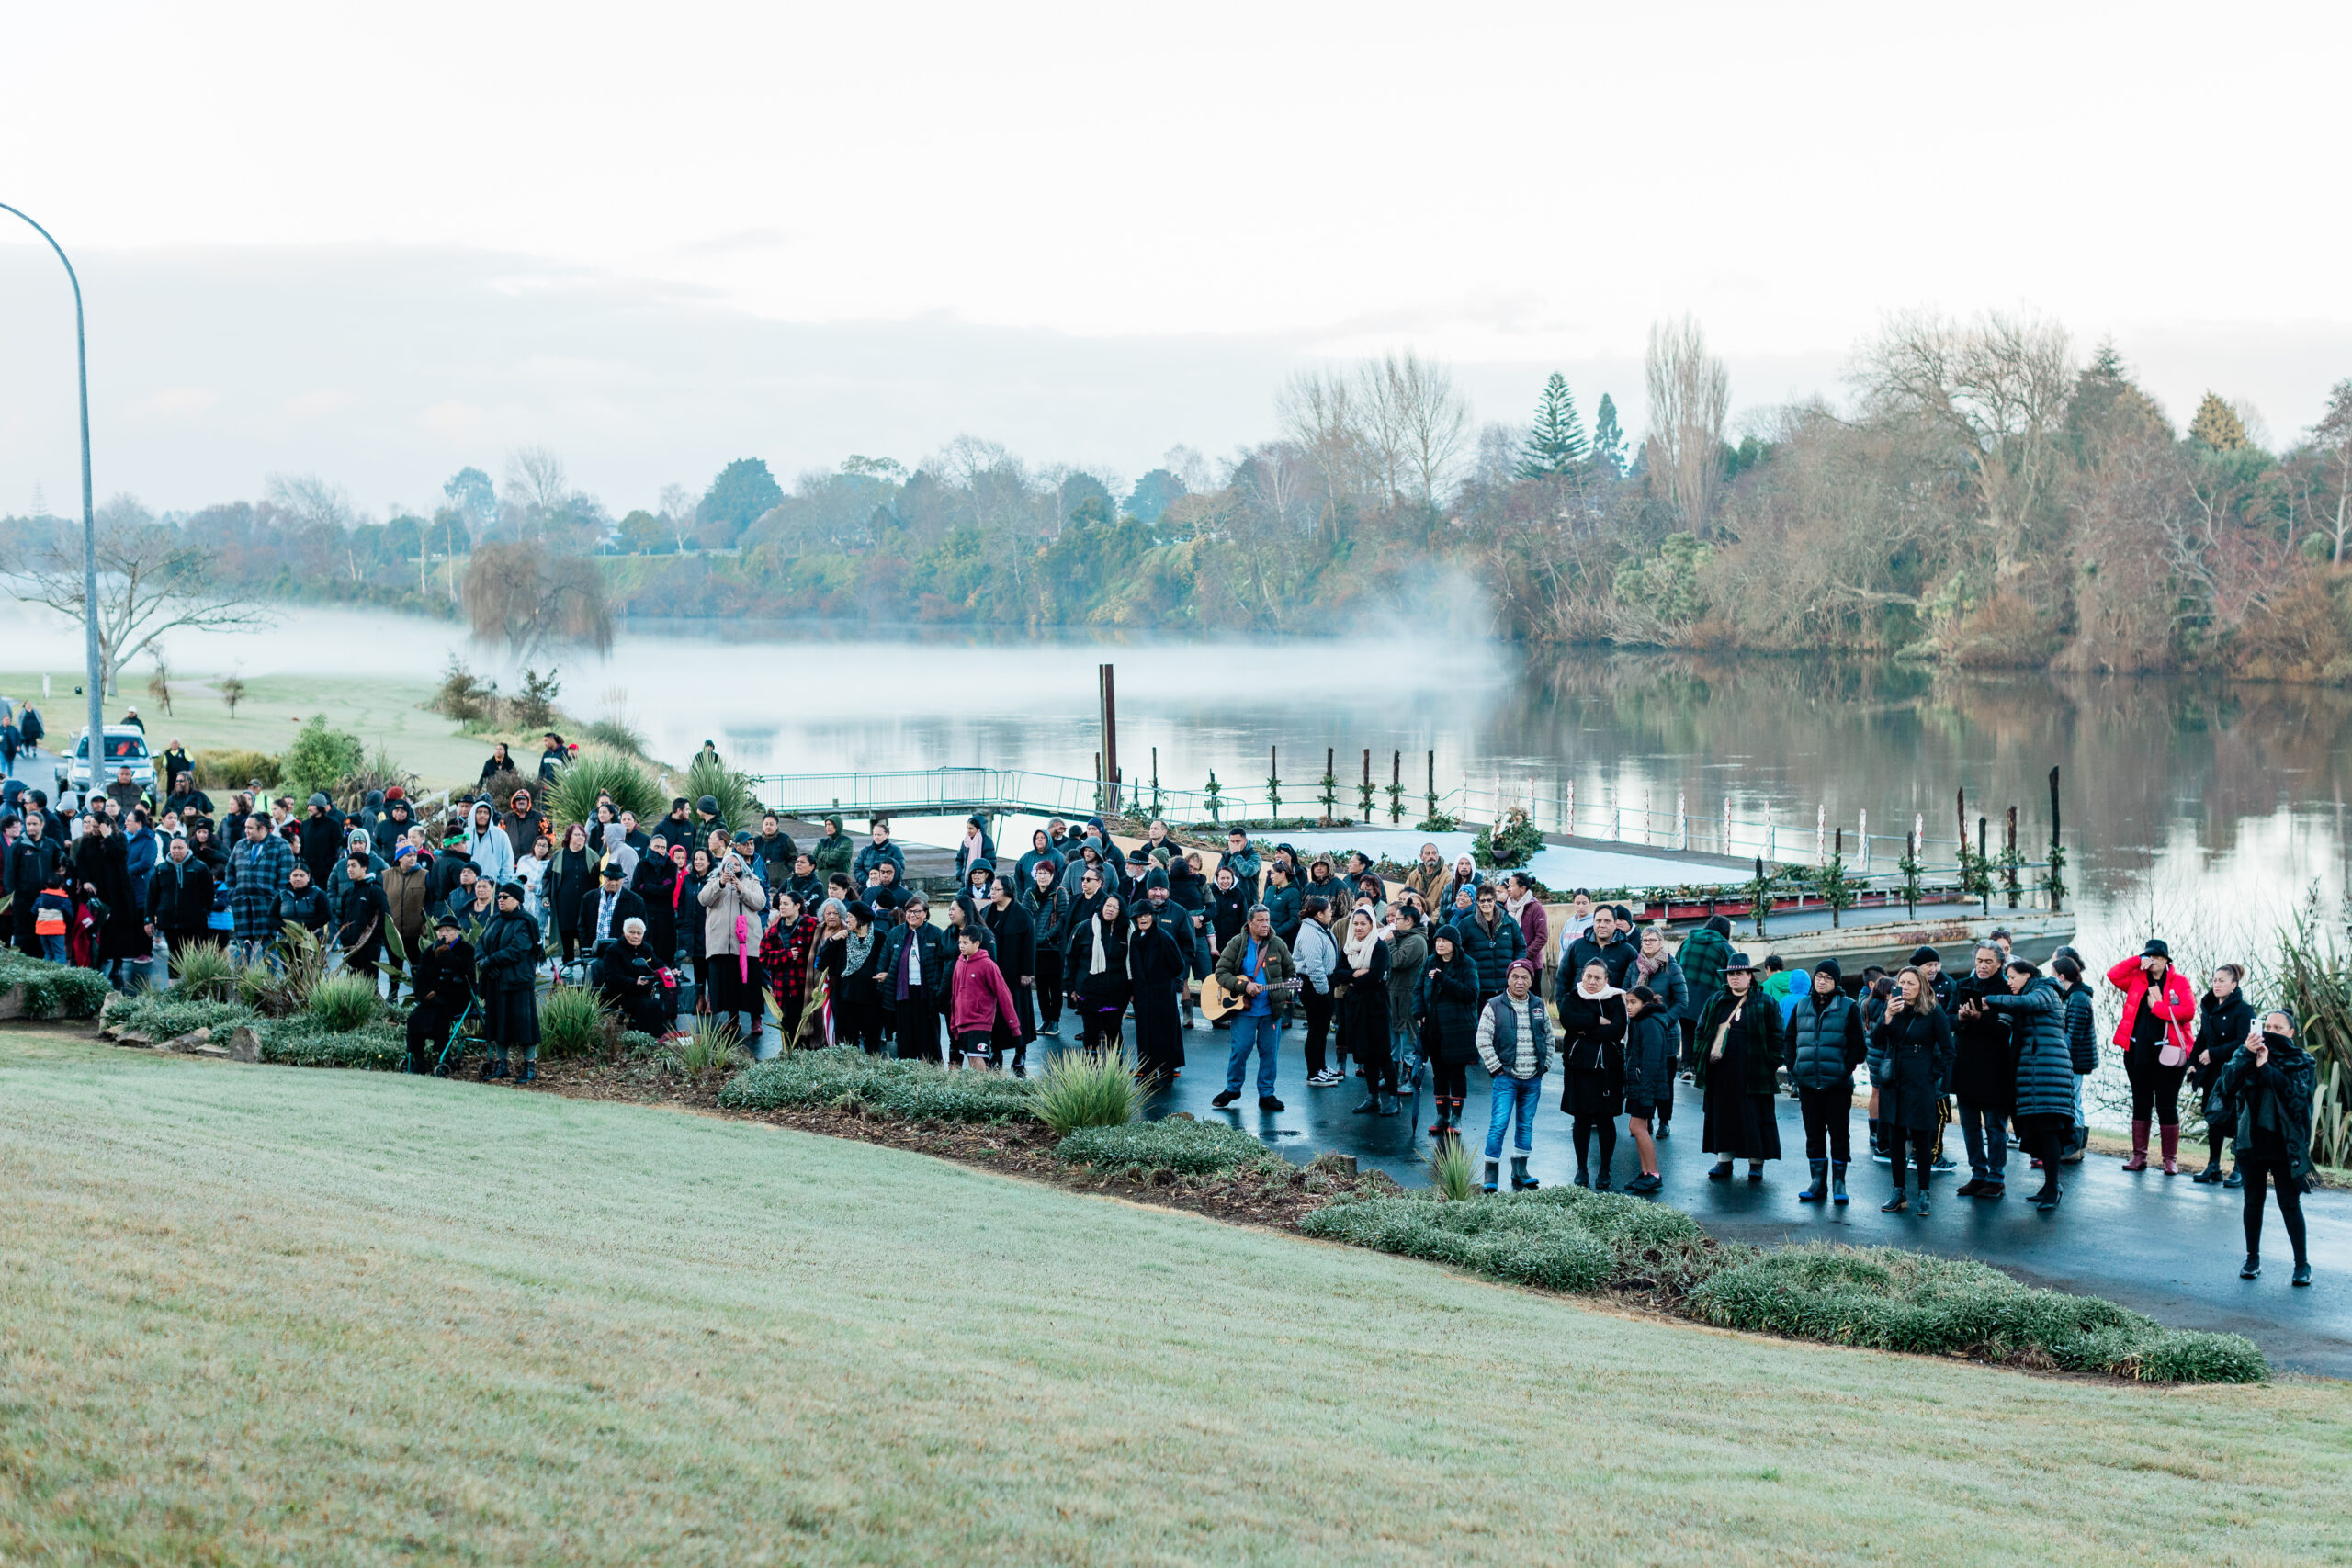 Crowd of people along the Waikato river bank on a foggy morning